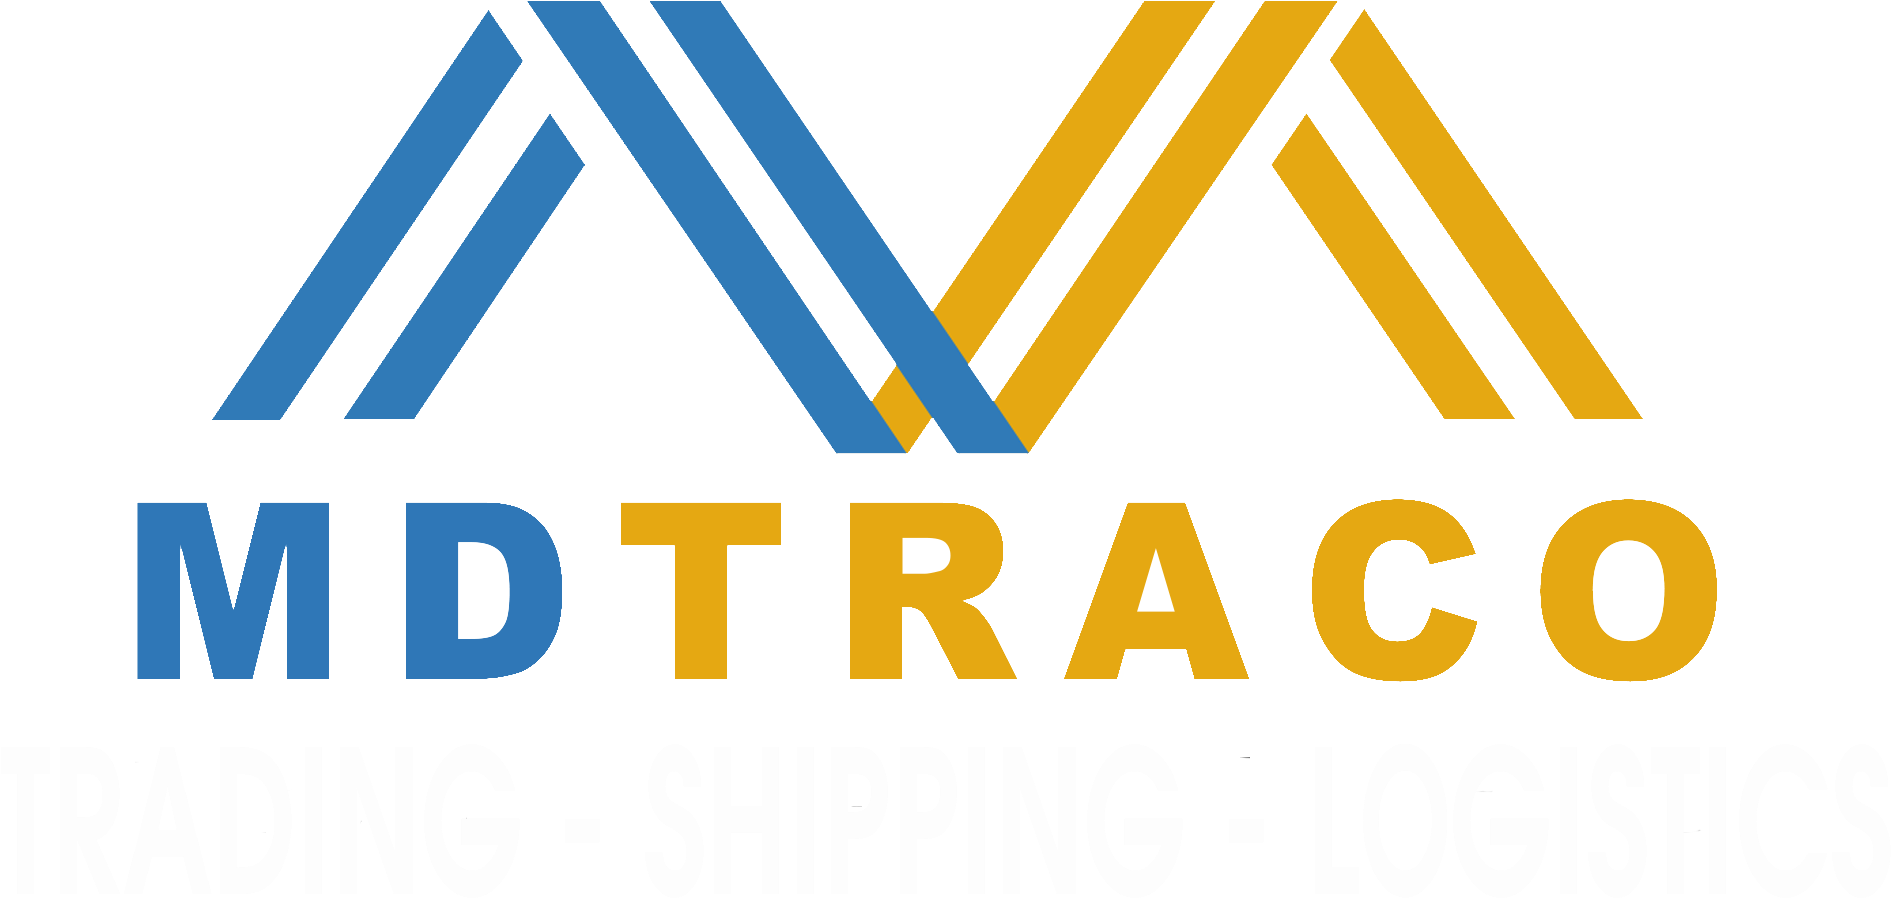 Md Traco Offers A Host Of Forwarding, Trading Management - Statistical Graphics (2000x2000)